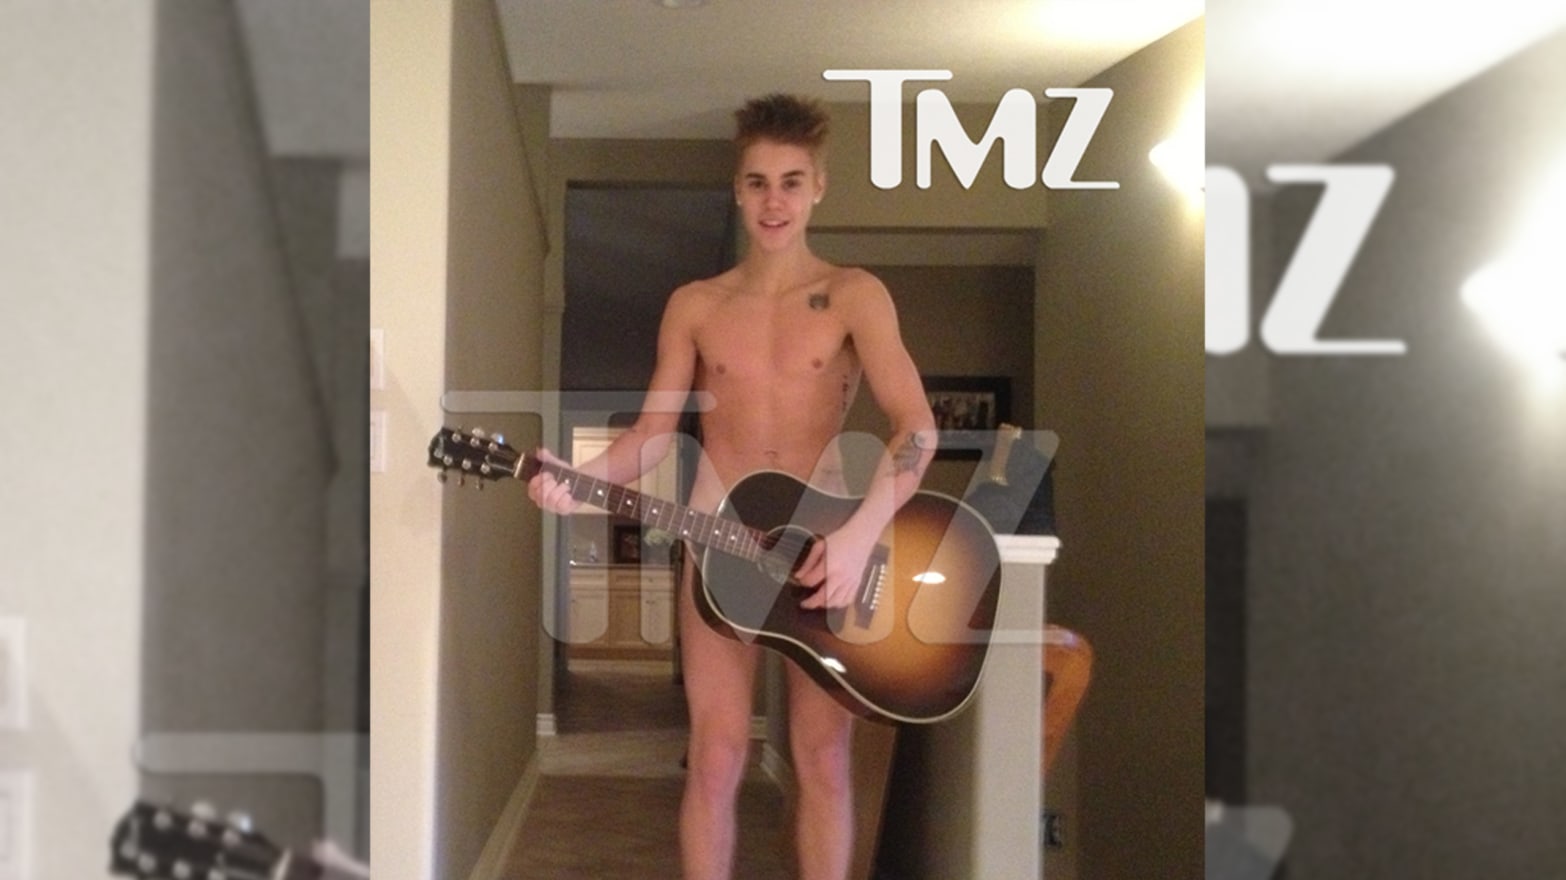 doc lane recommends justin bieber nude pictures leaked pic